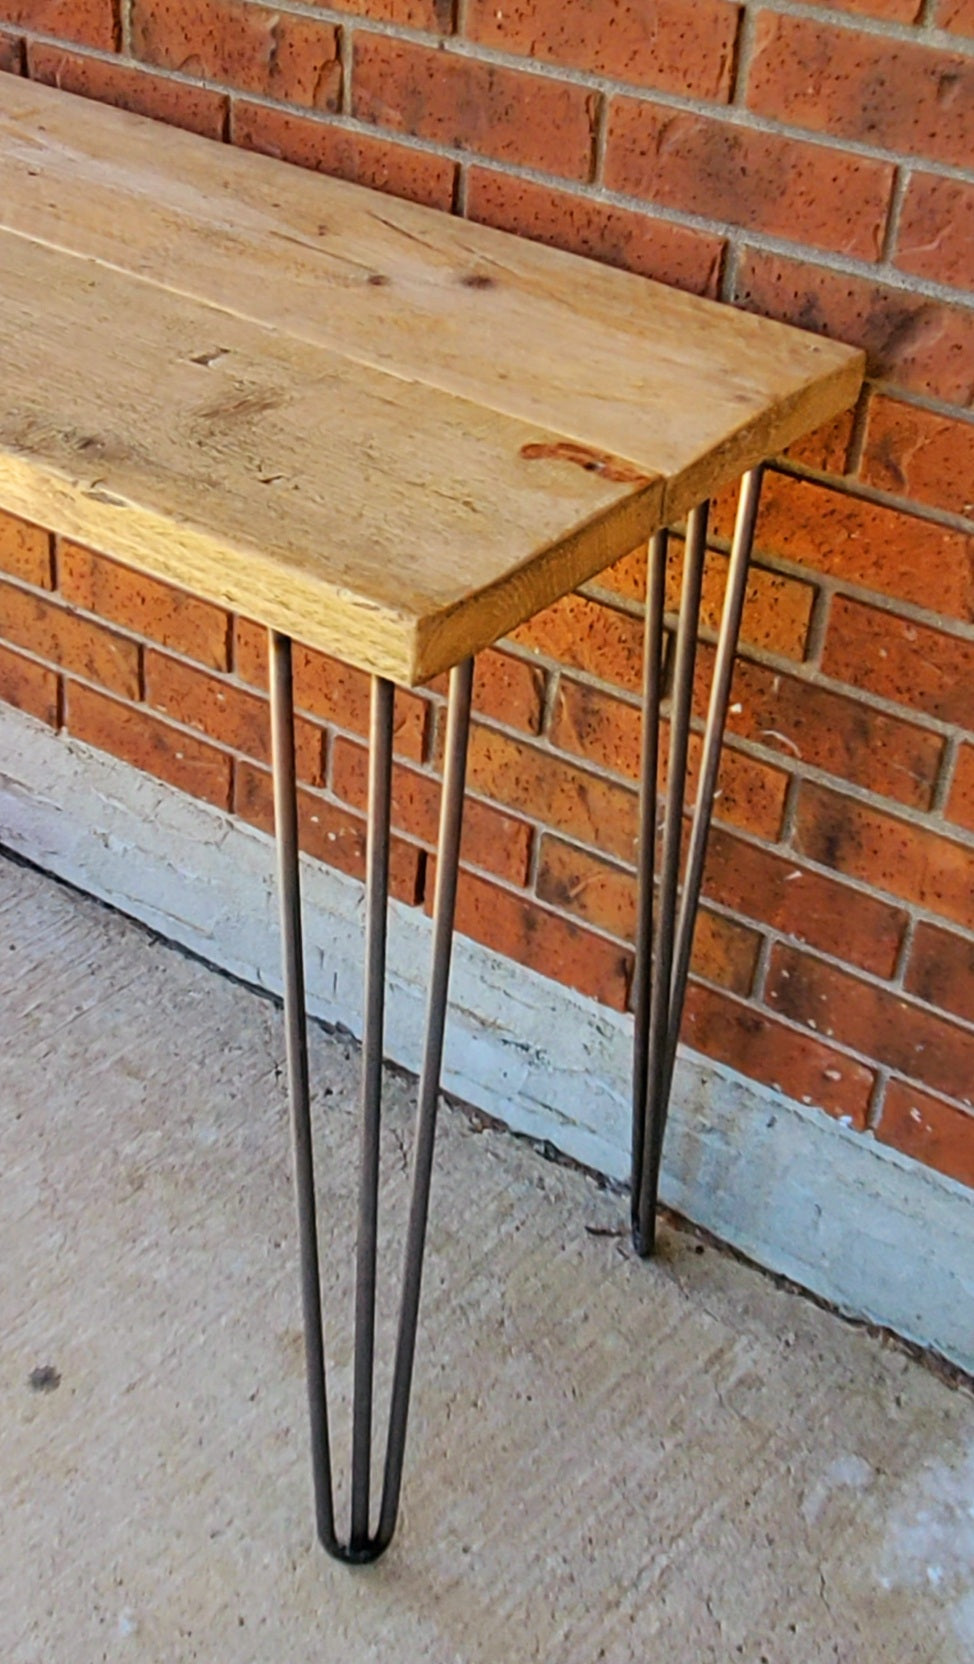 Vintage Hairpin Leg Desk / Table / Bench - Home Office / Schooling - Spearhead Collection - Benches & Tables - Barn Restoration, Benches Stools & Tables, Country Farmhouse, Hairpin Legs, Home